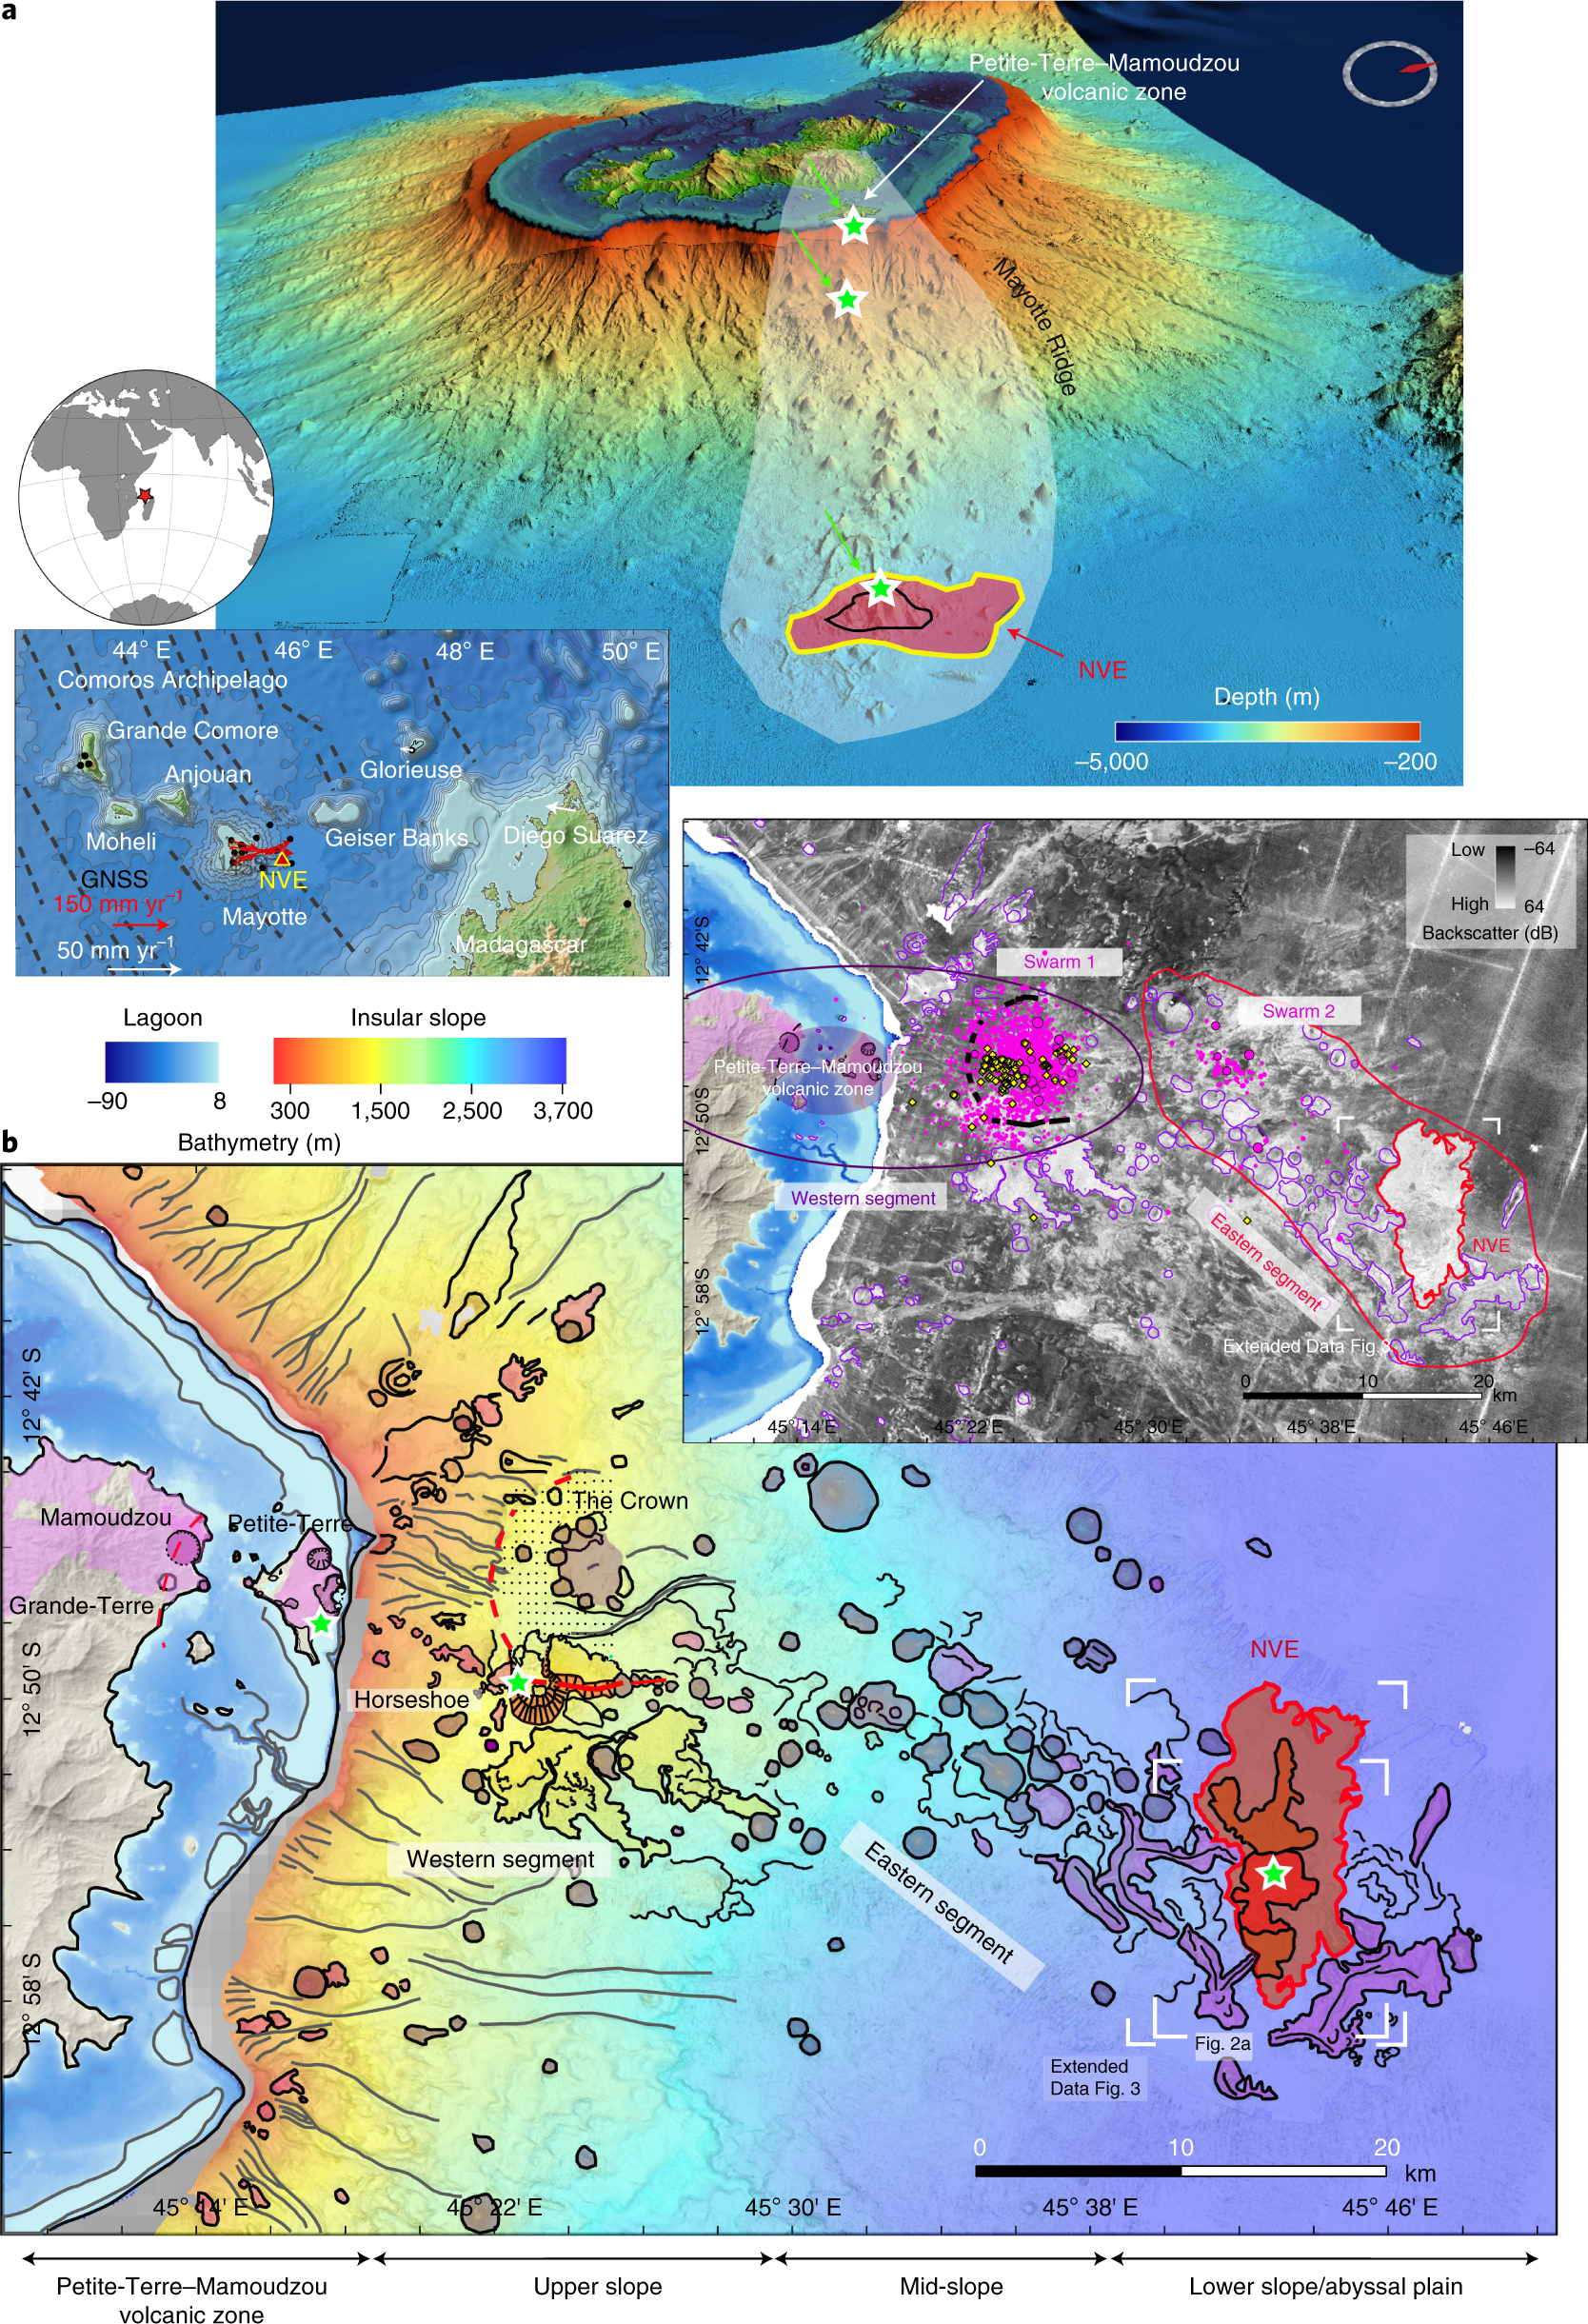 Birth of a large volcanic edifice offshore Mayotte via lithosphere-scale  dyke intrusion